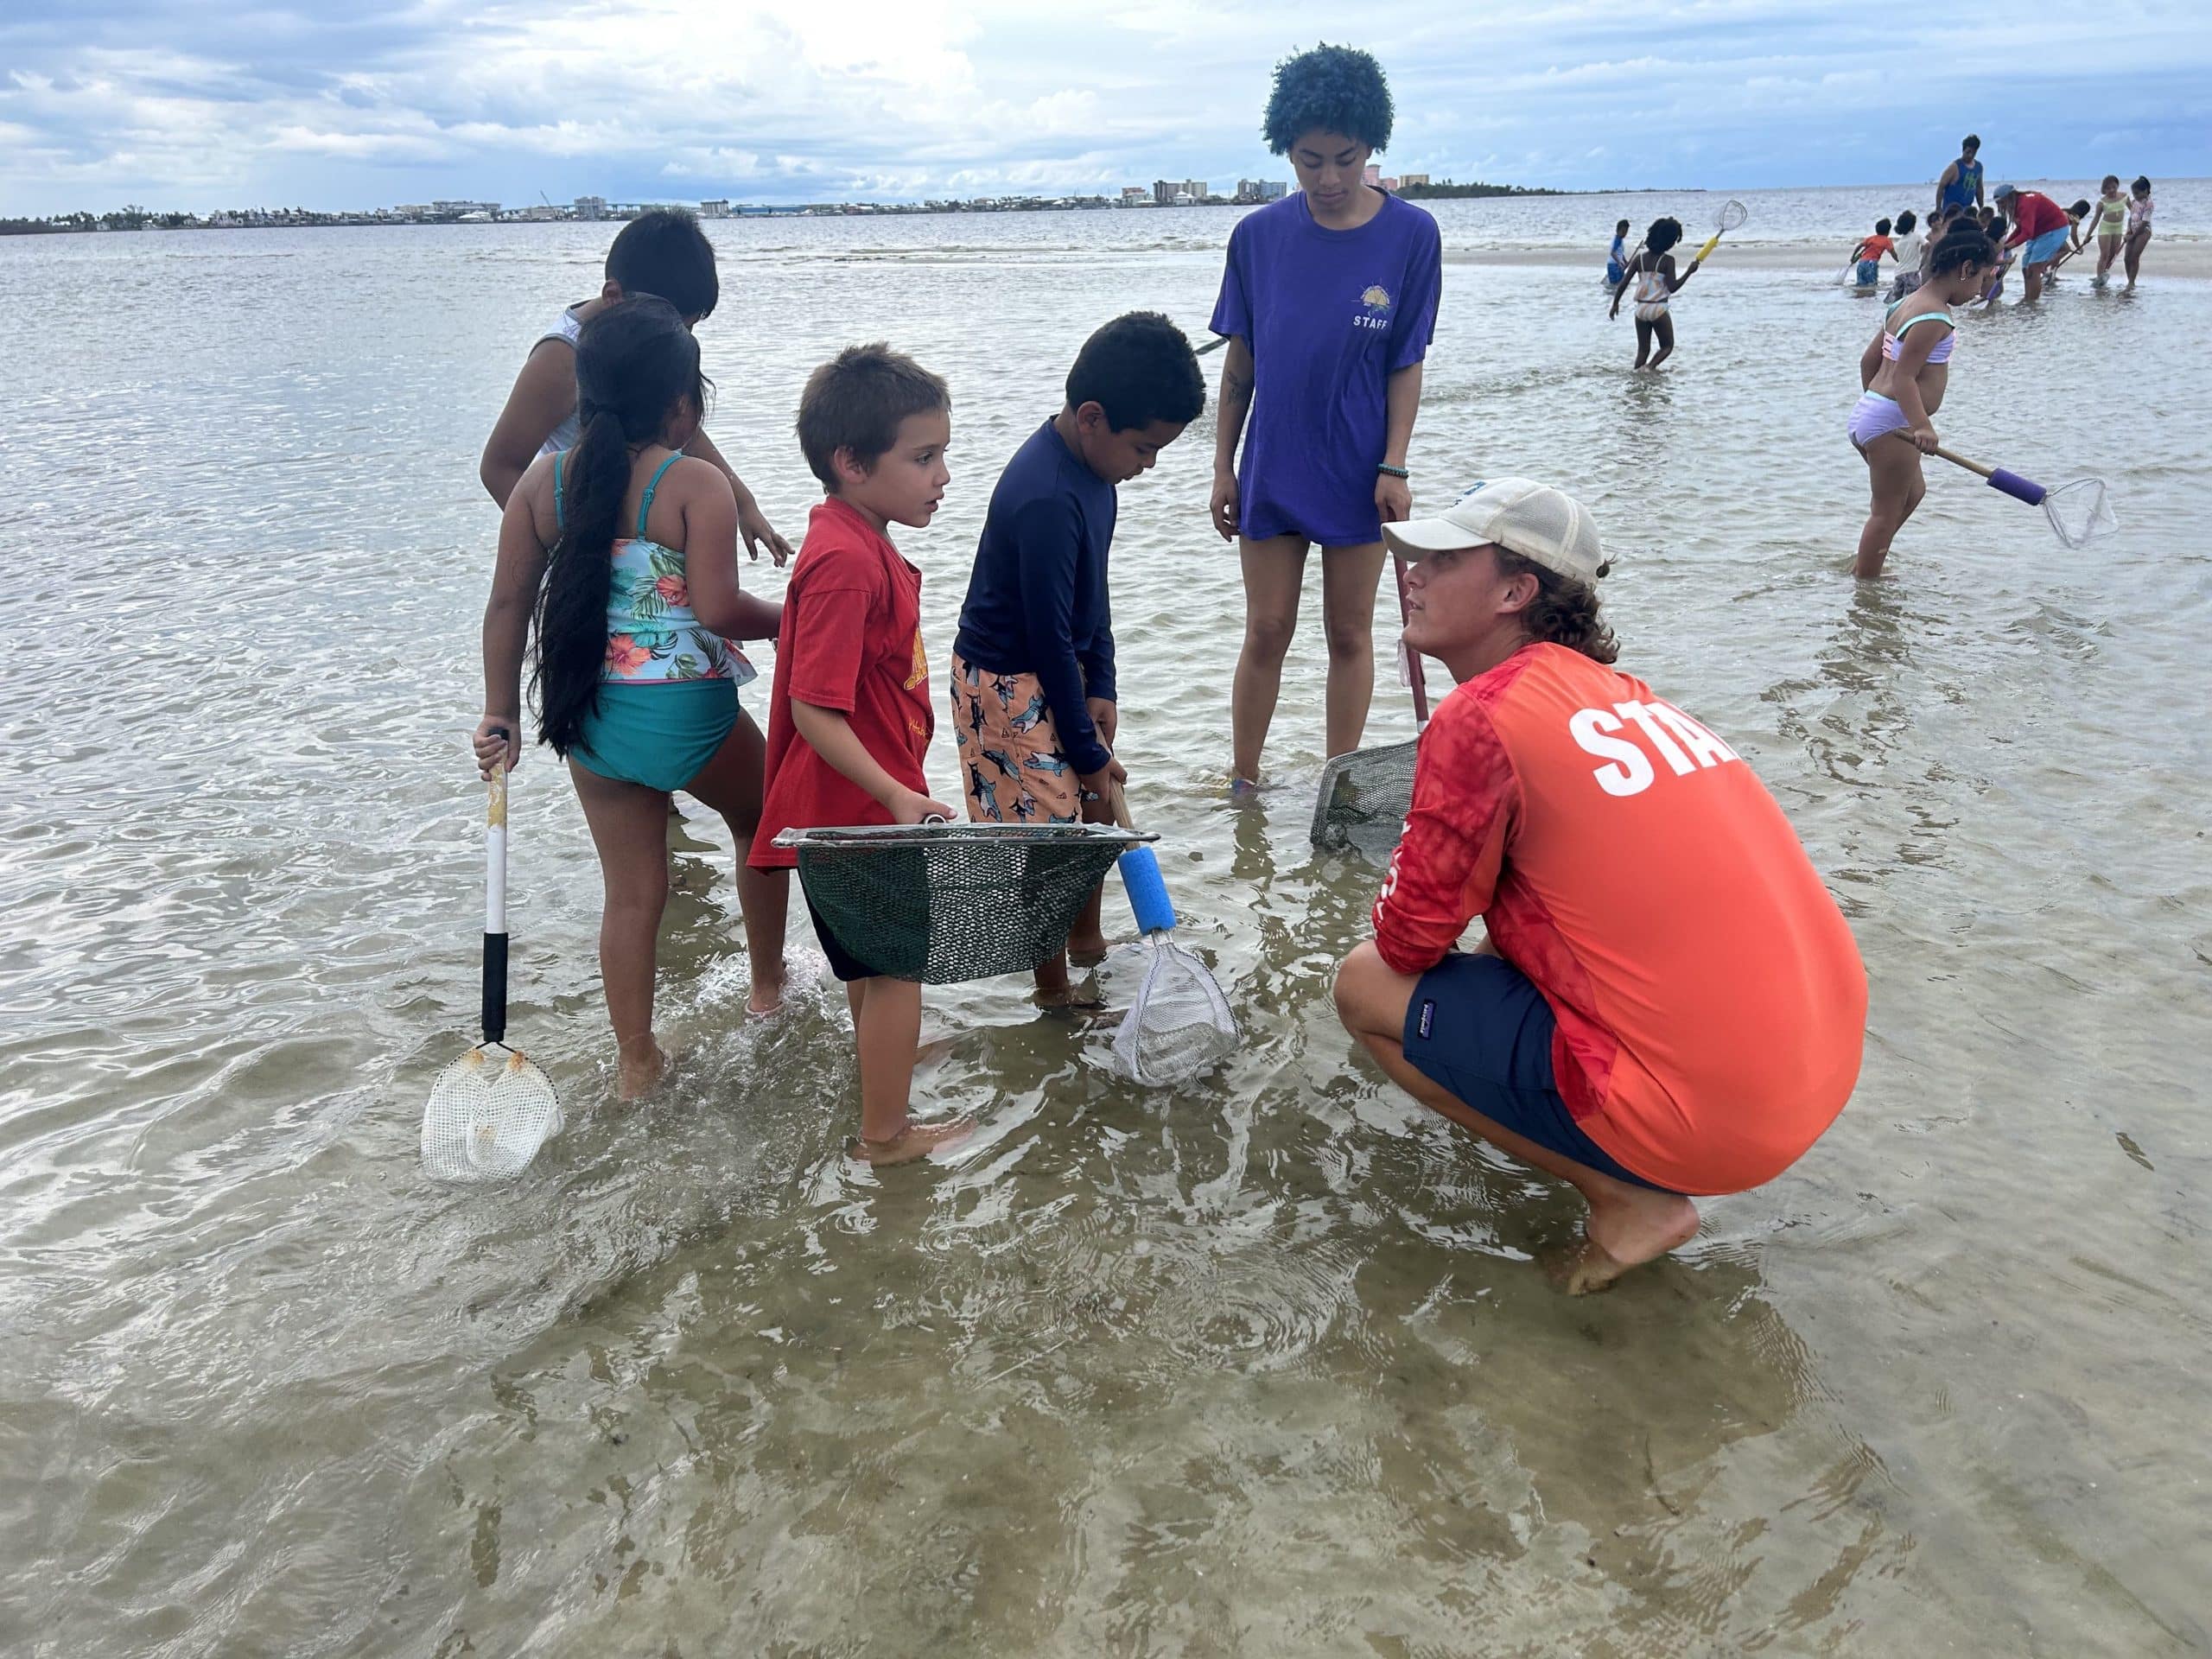 Marine Educator Austin Wise discovers a beach find with A Chance to Sea students on Bunche Beach.